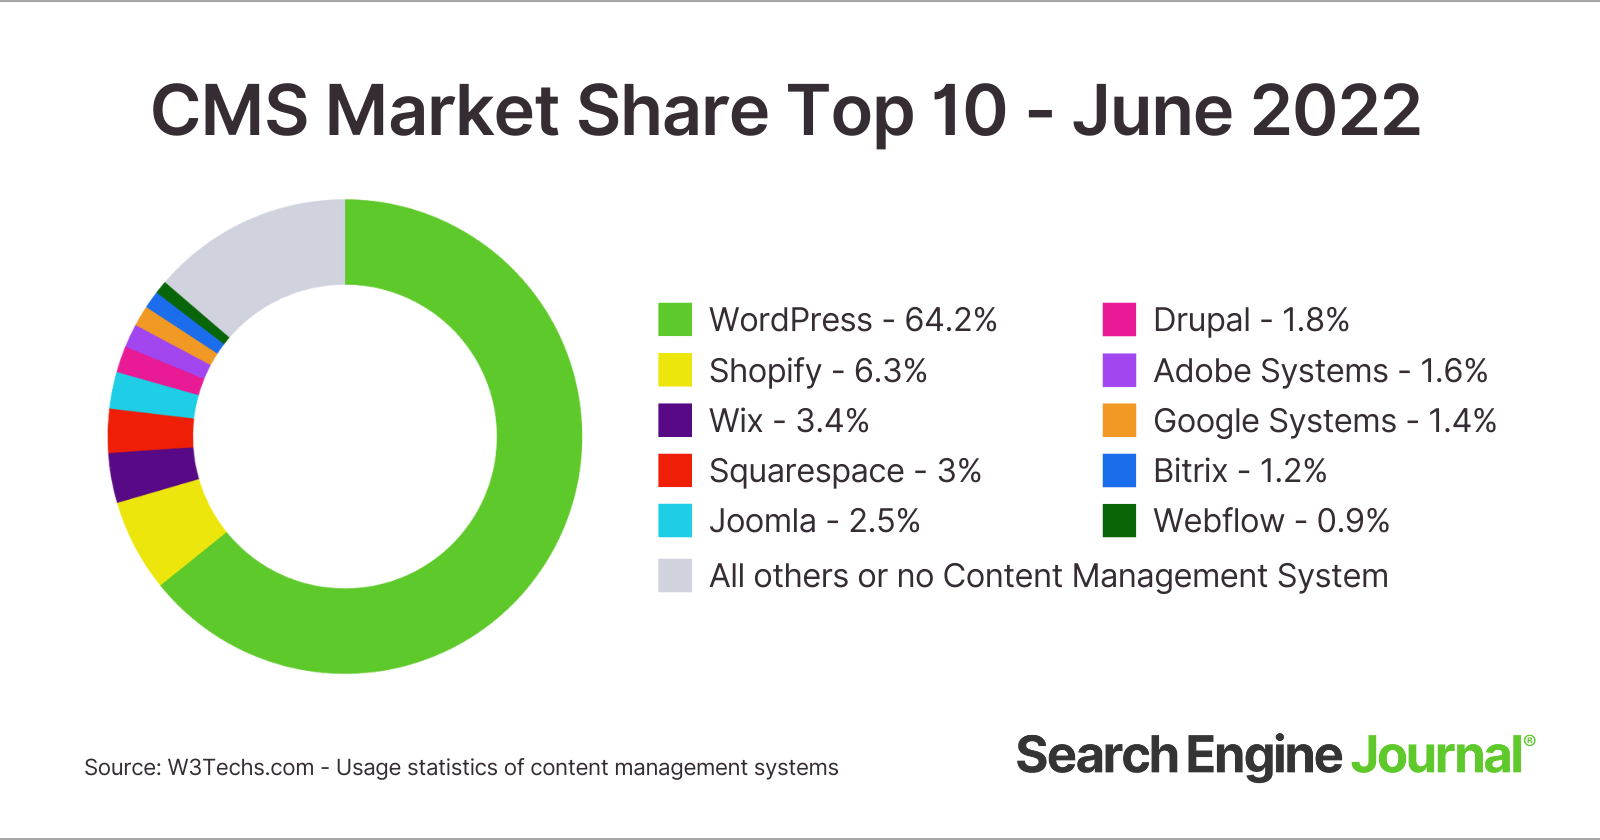 top 10 content management systems market share as of June 2022